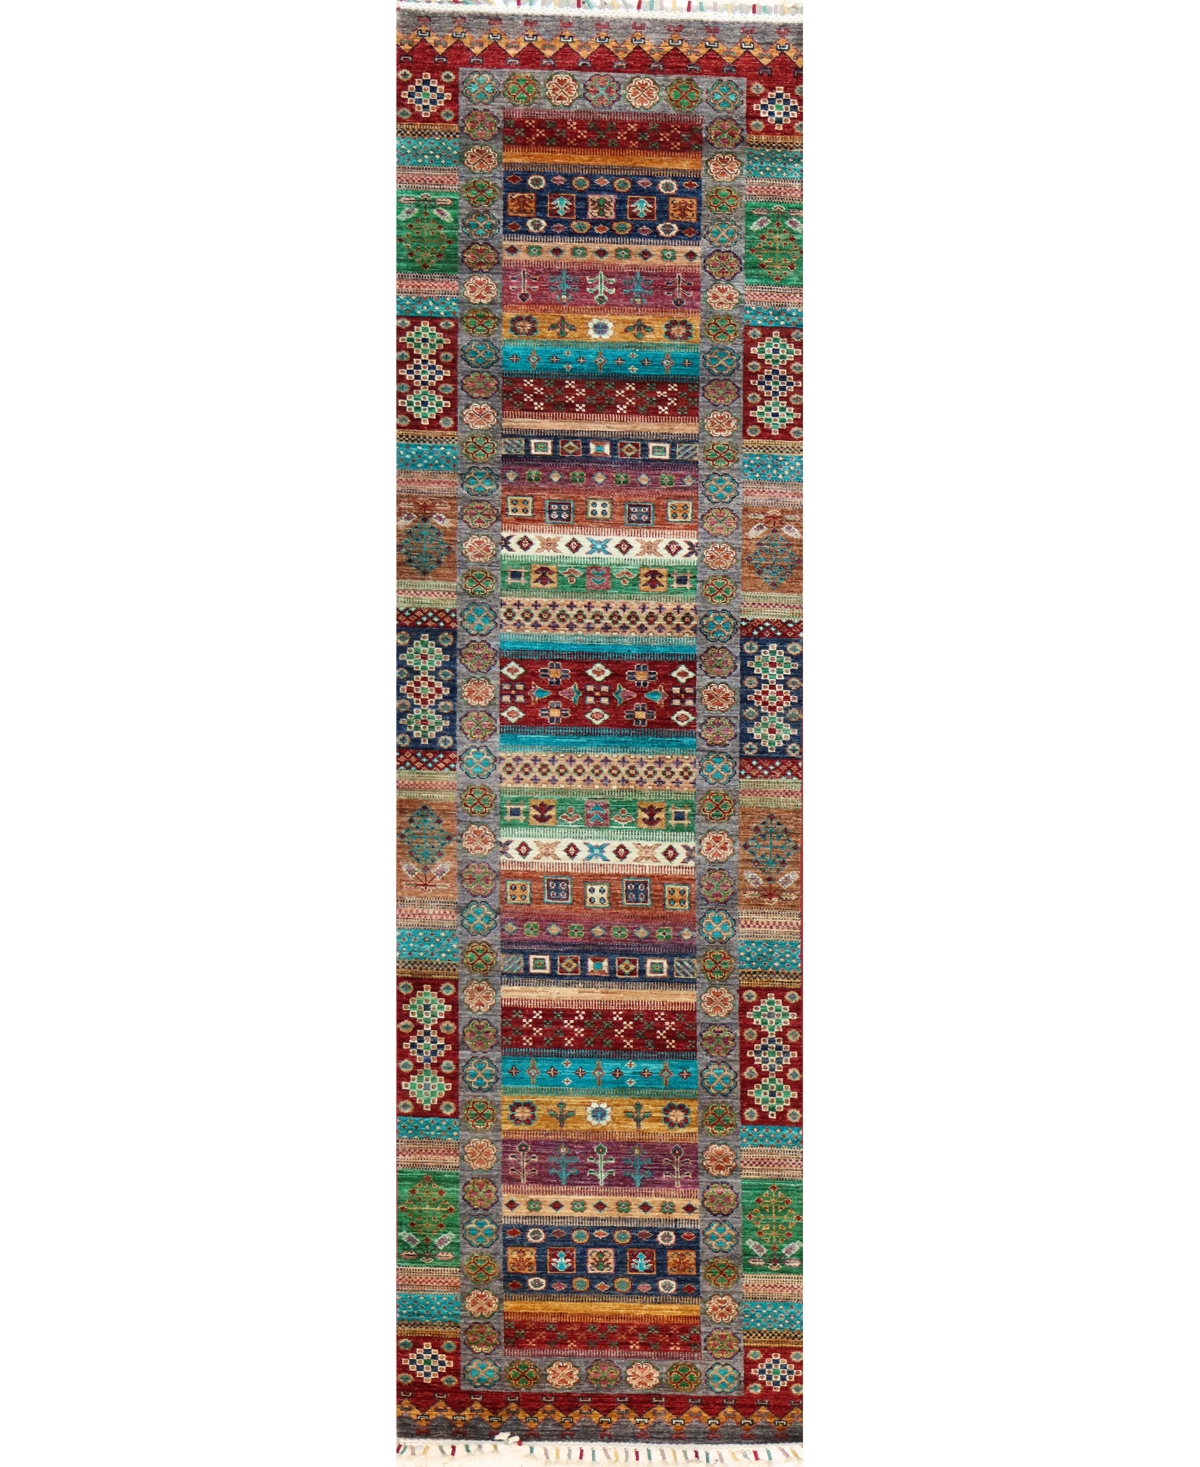 Bb Rugs One Of A Kind Khorjeen 2'7" X 13'7" Runner Area Rug In Multi